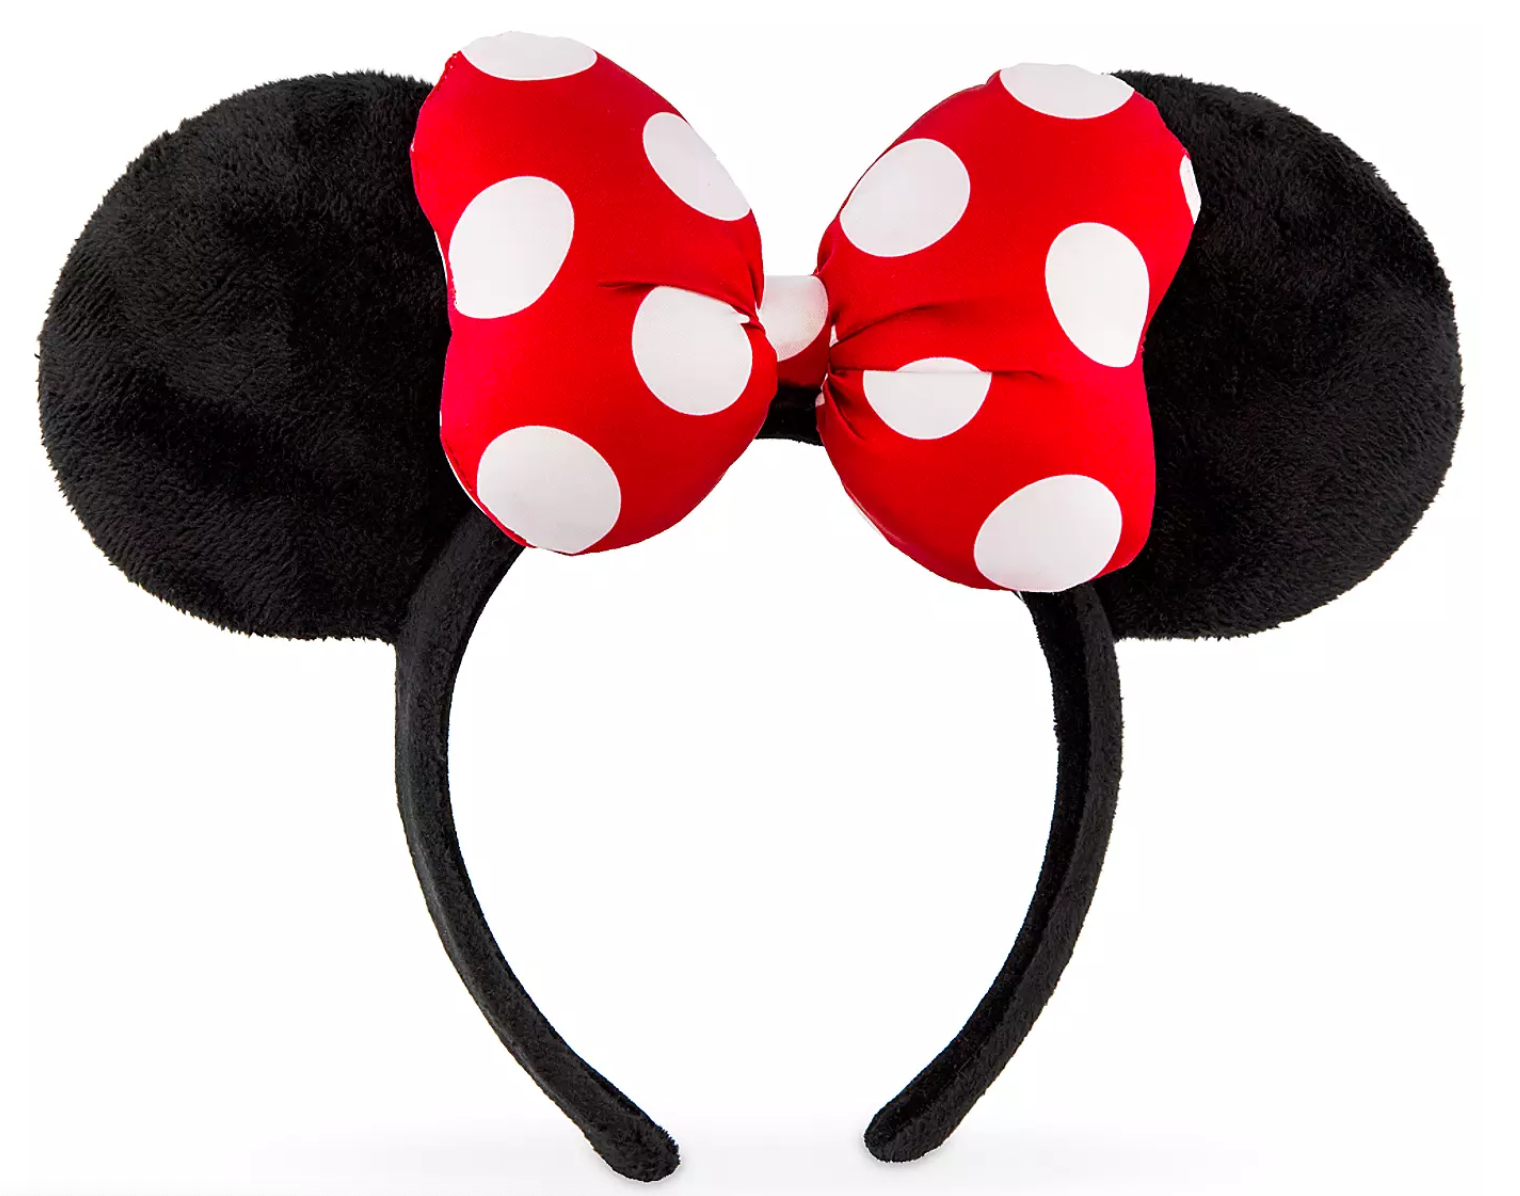 Dress Your Phone Up In Disney Style With The New Minnie Mouse Case We Spotted In Hollywood Studios The Disney Food Blog